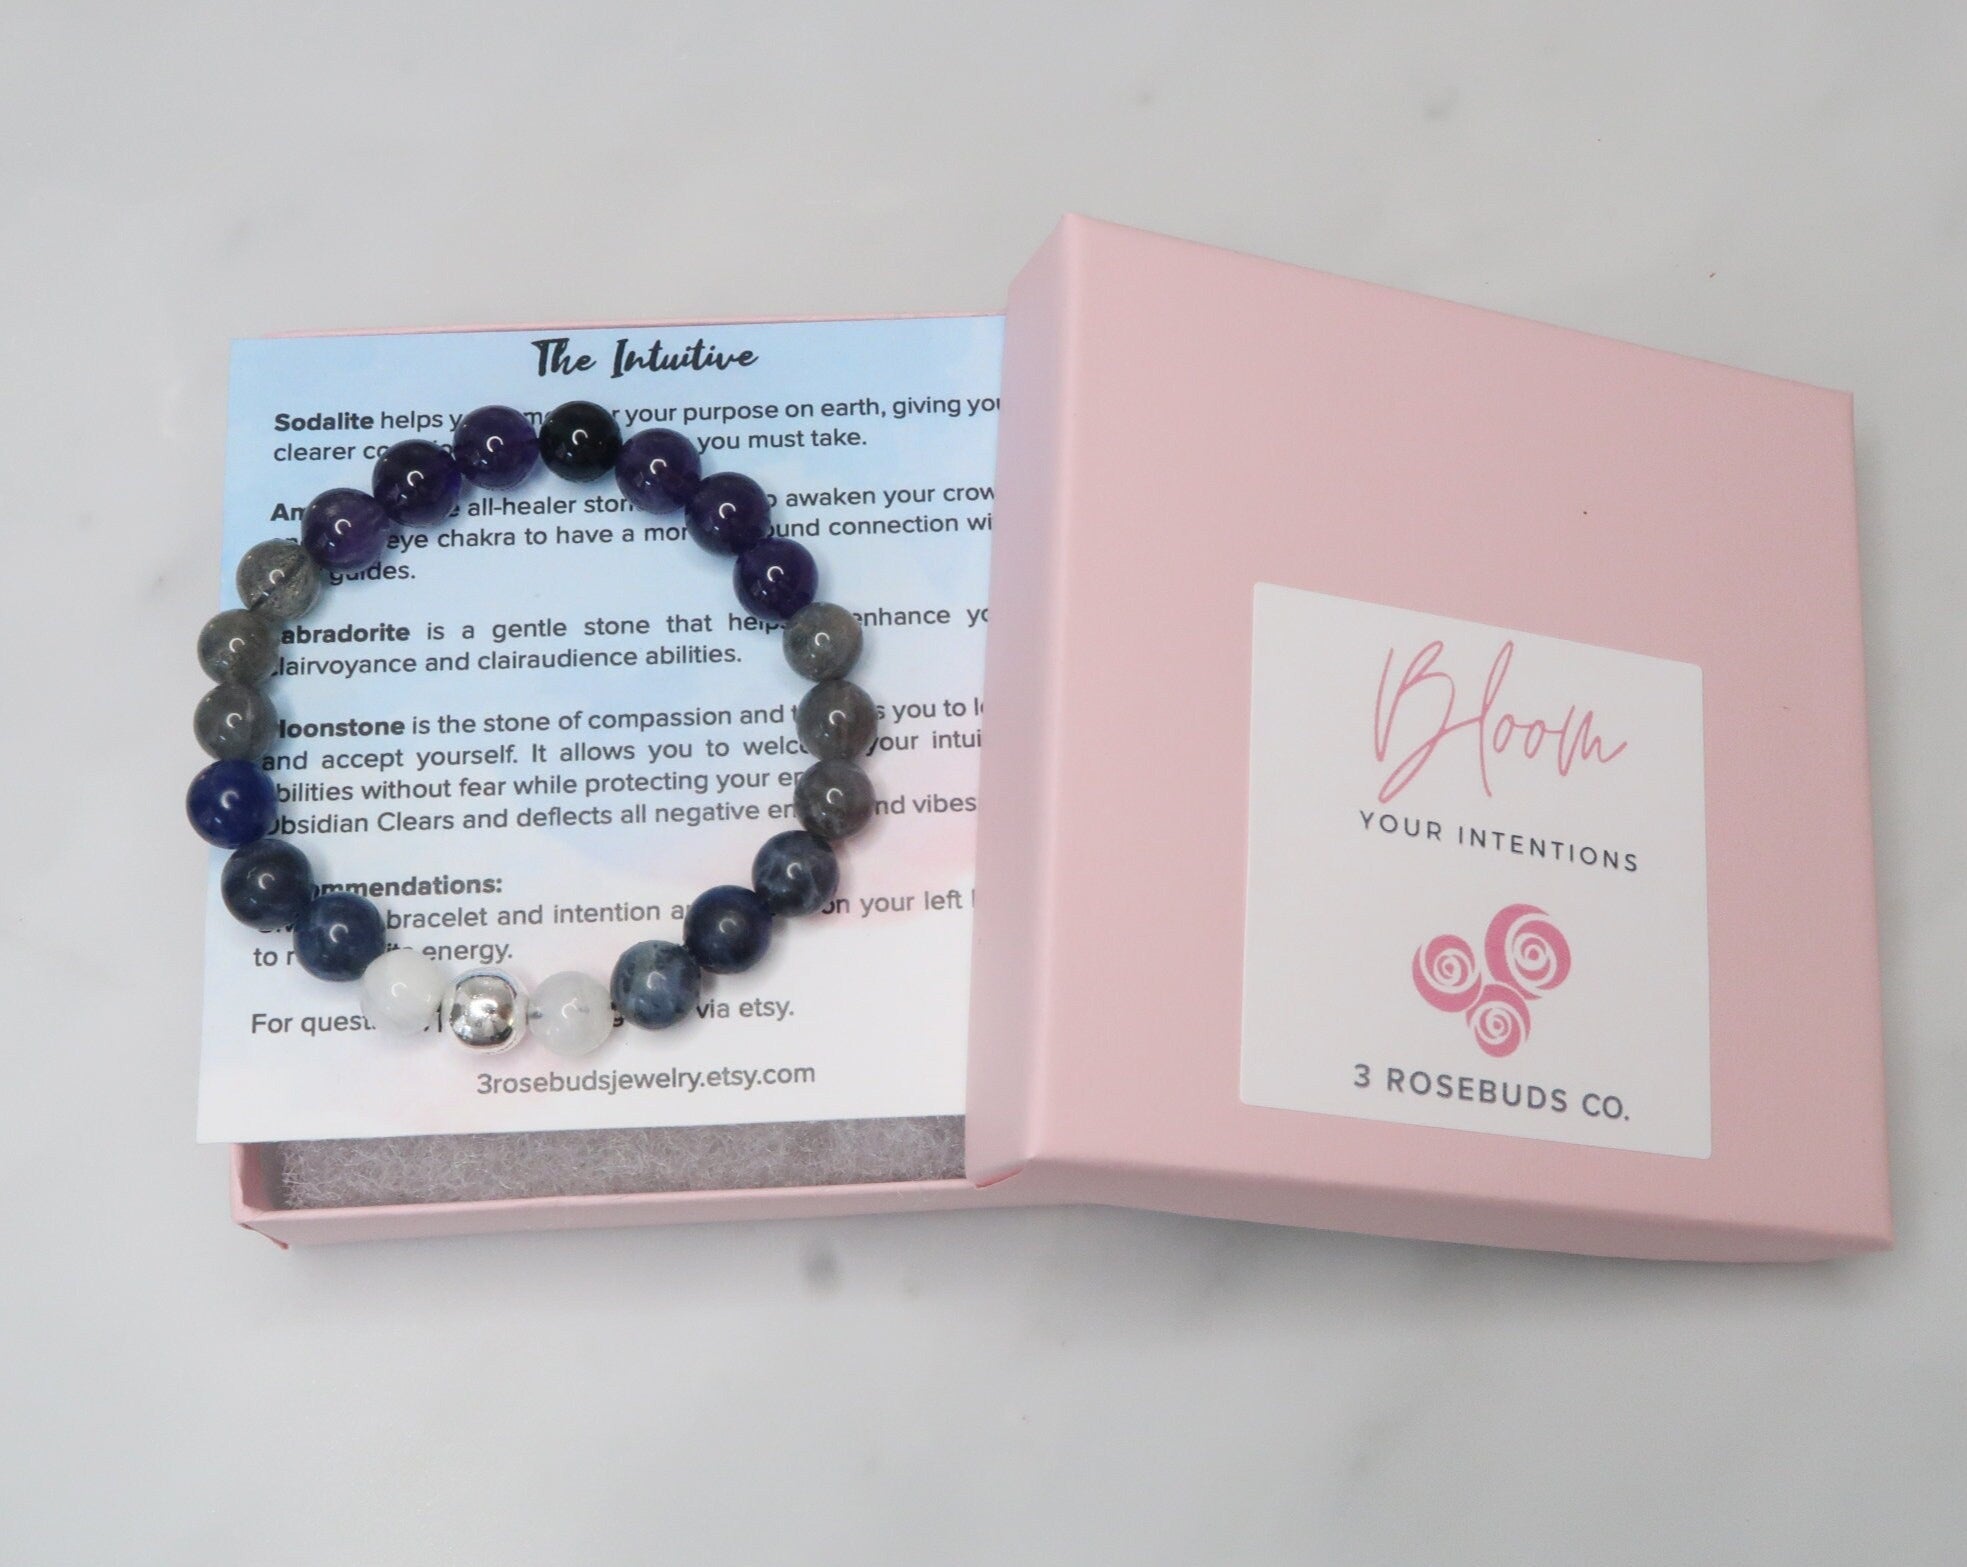 Awaken your psychic intuitive abilities with the power of healing crystal gemstones. This bracelet features sodalite, moonstone, labradorite, amethyst and black obsidian to help you on your development journey. 